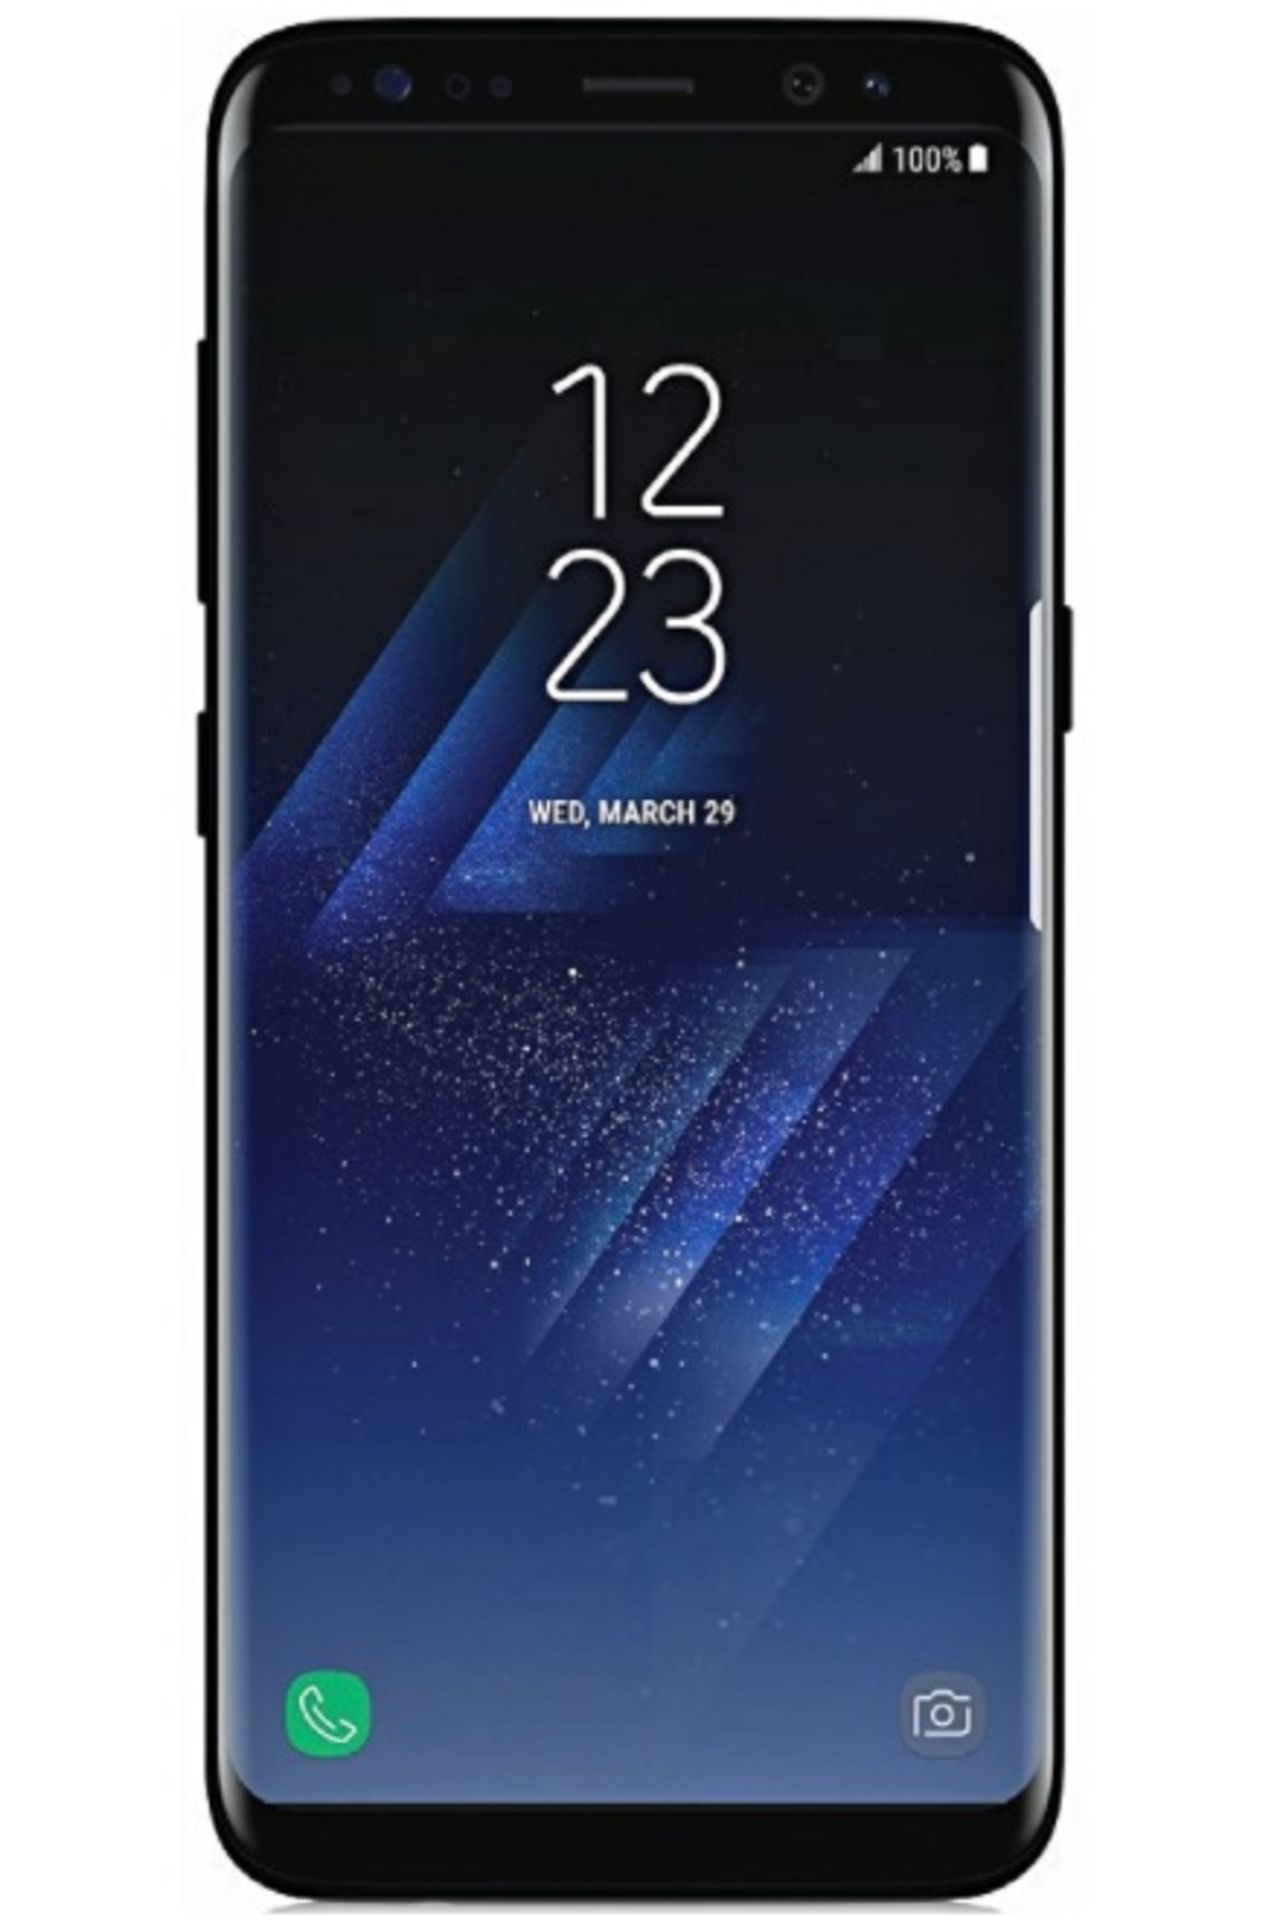 Grade A Samsung S8+ ( G9550F ) Colours May Vary - Item Available After Approx 15 Working Days After